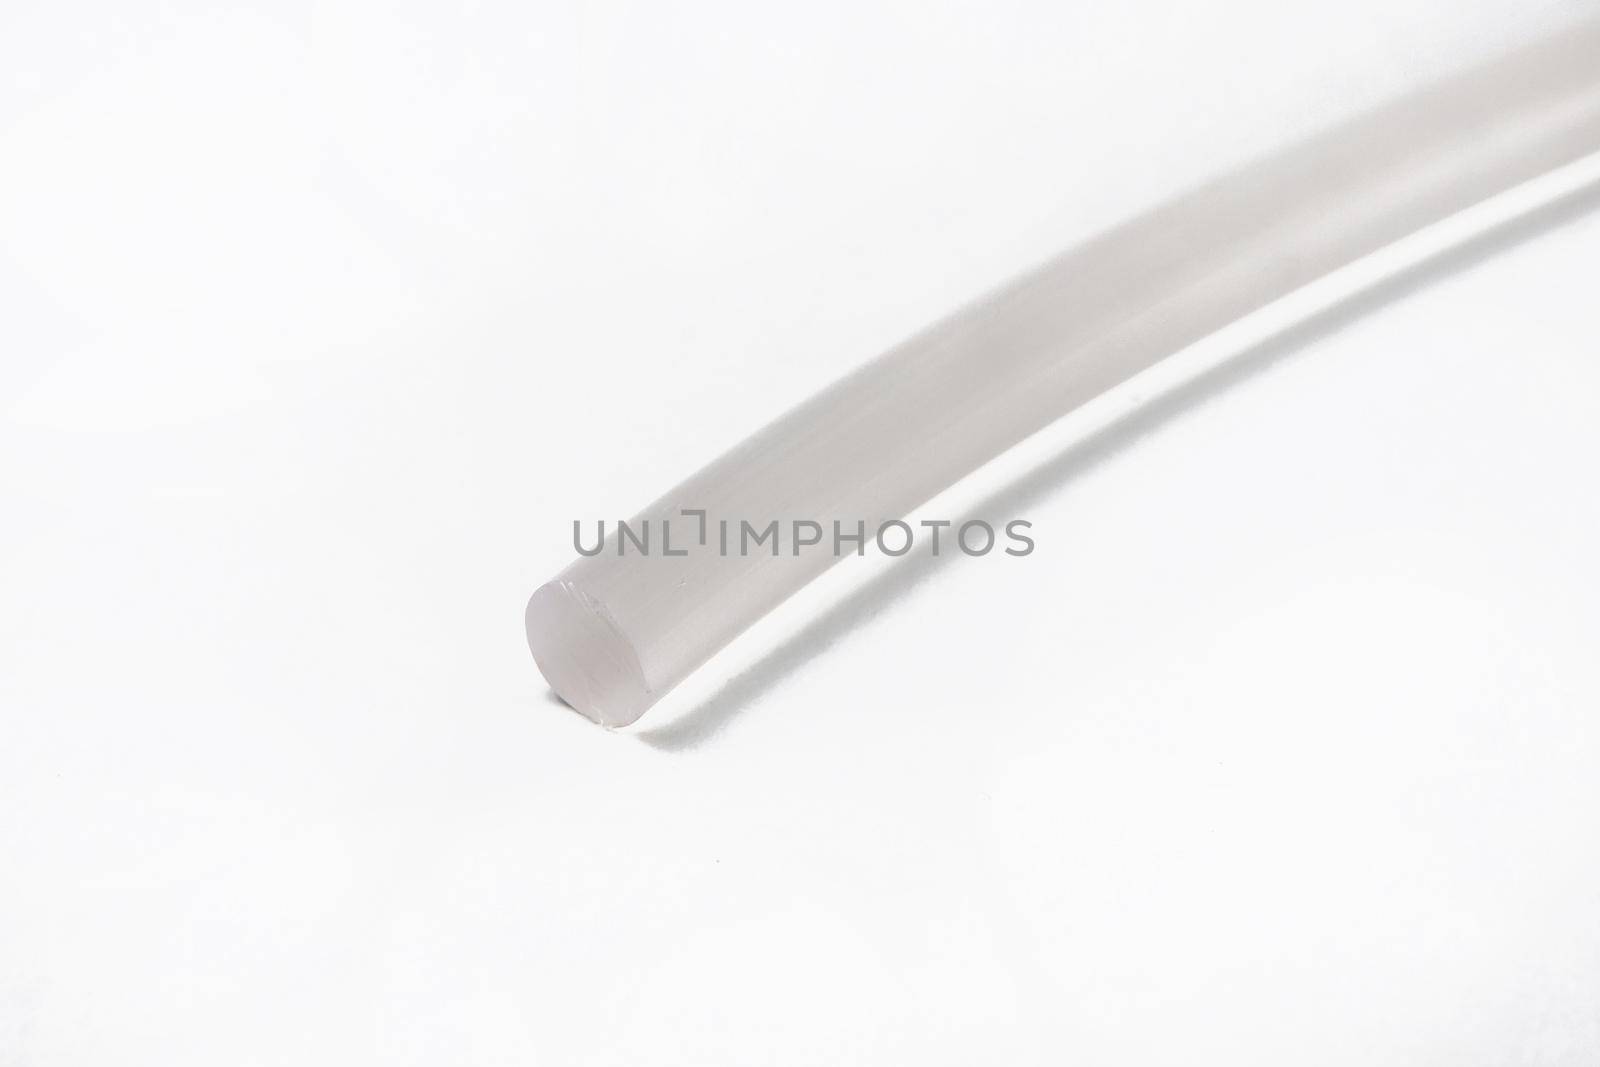 The cut tip of the rubber hose, on a white background by deandy